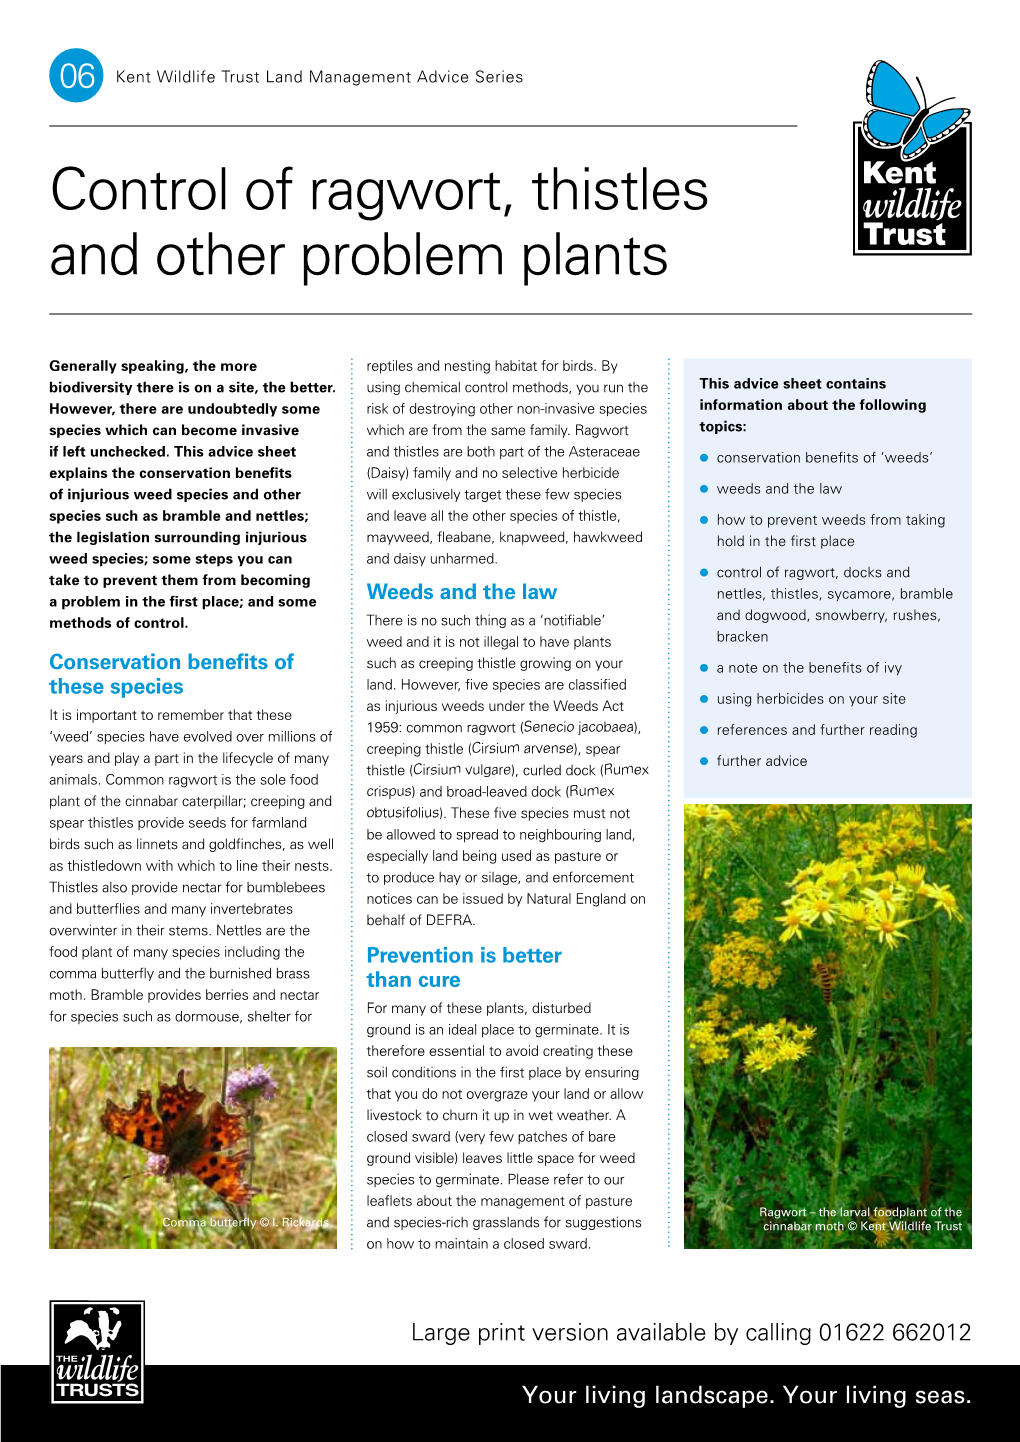 Control of Ragwort, Thistles and Other Problem Plants